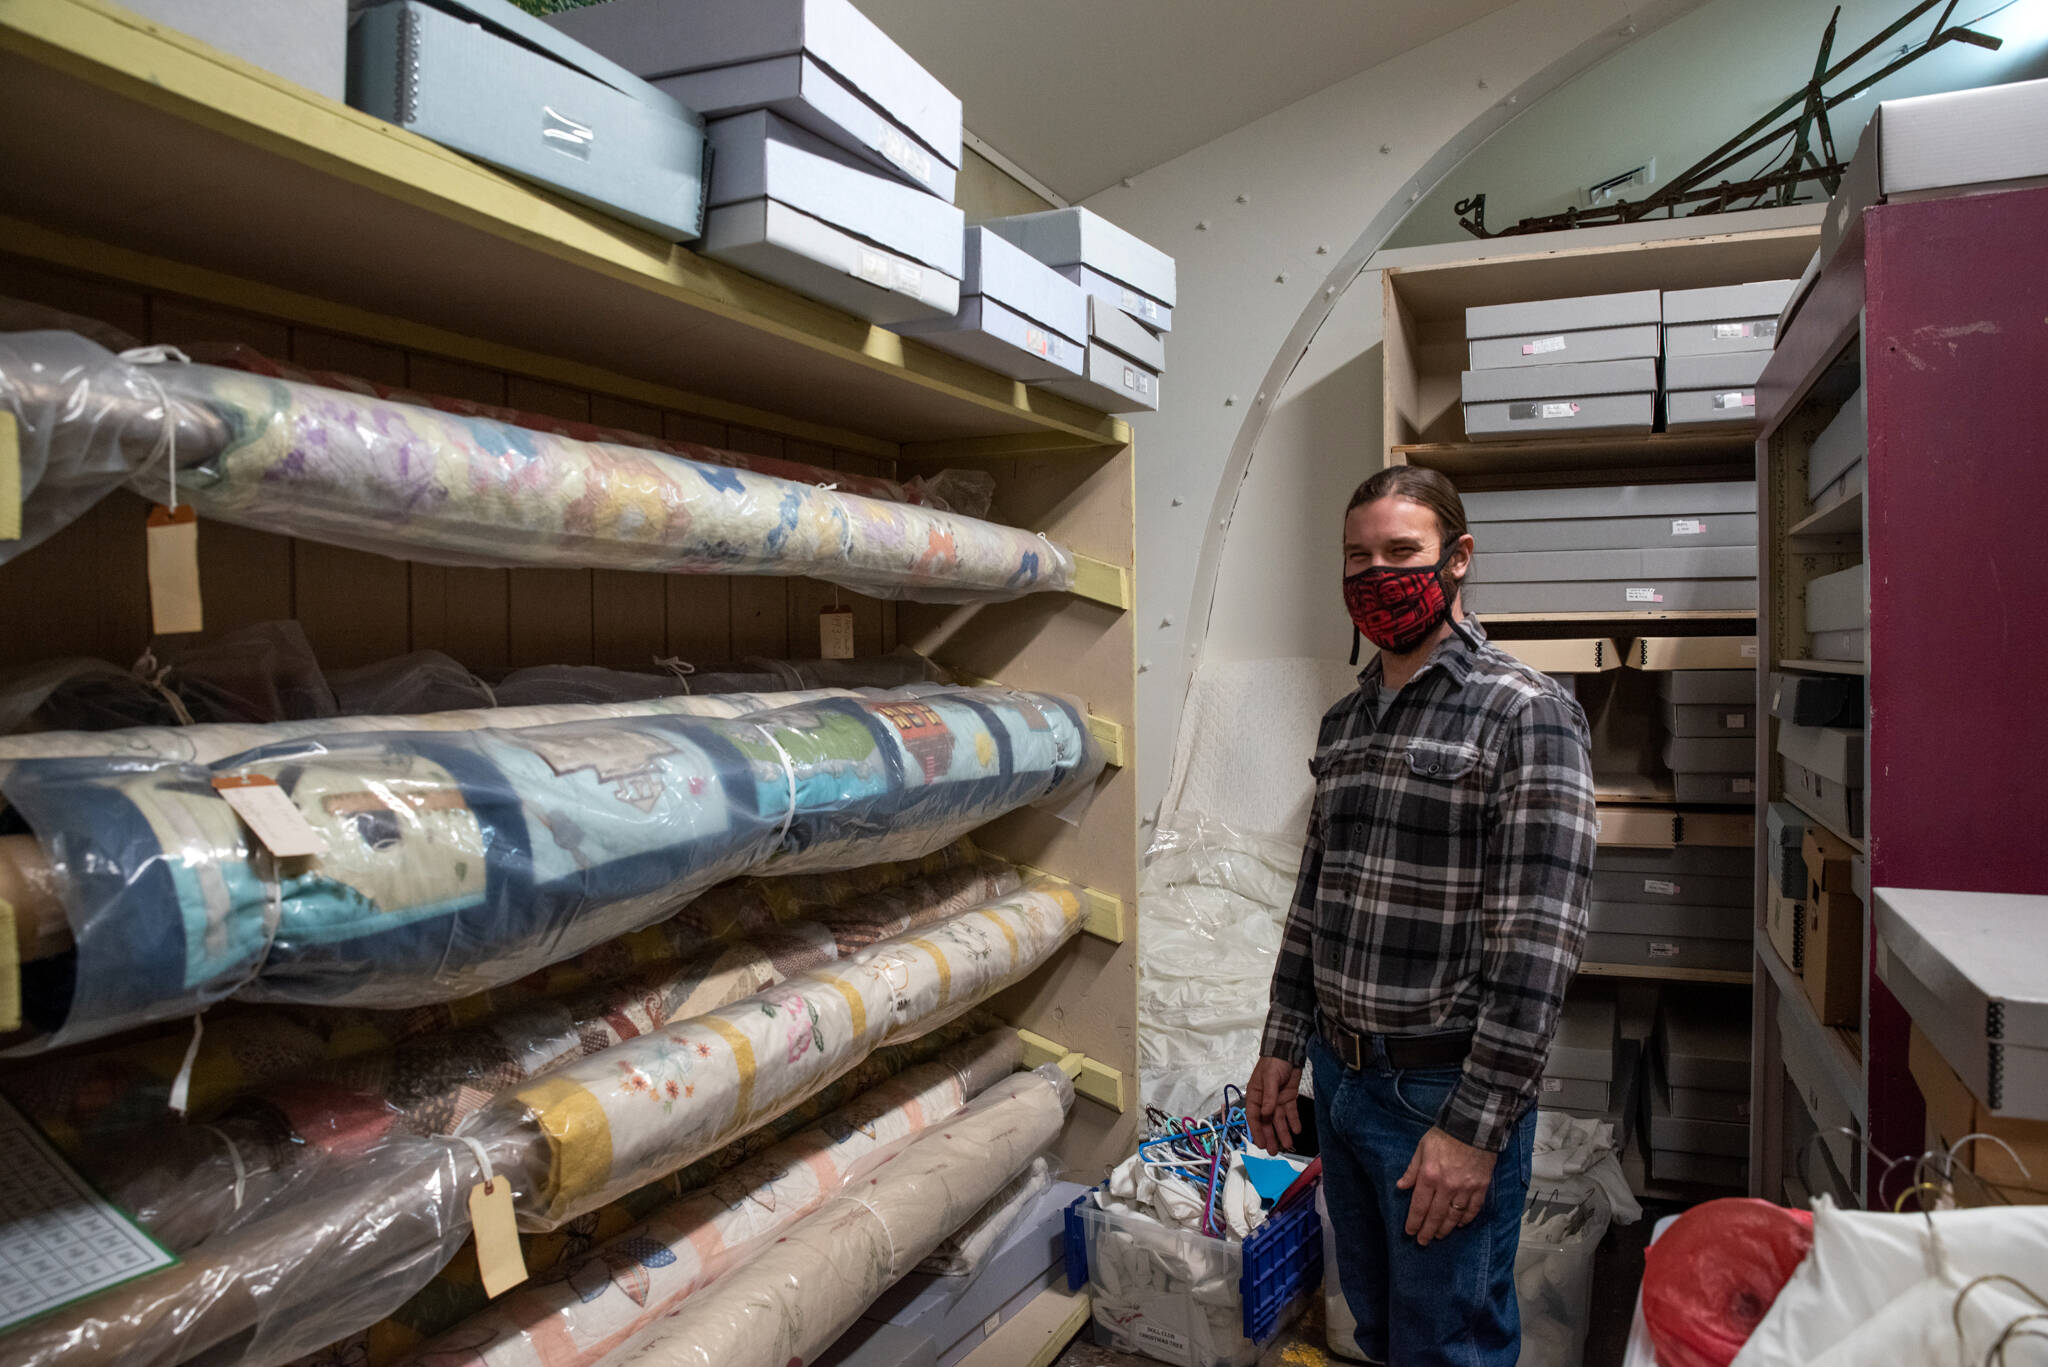 David Brownell, North Olympic History Center Executive Director, stands near rolls of heirloom quilts sewn by ancestors on the peninsula.